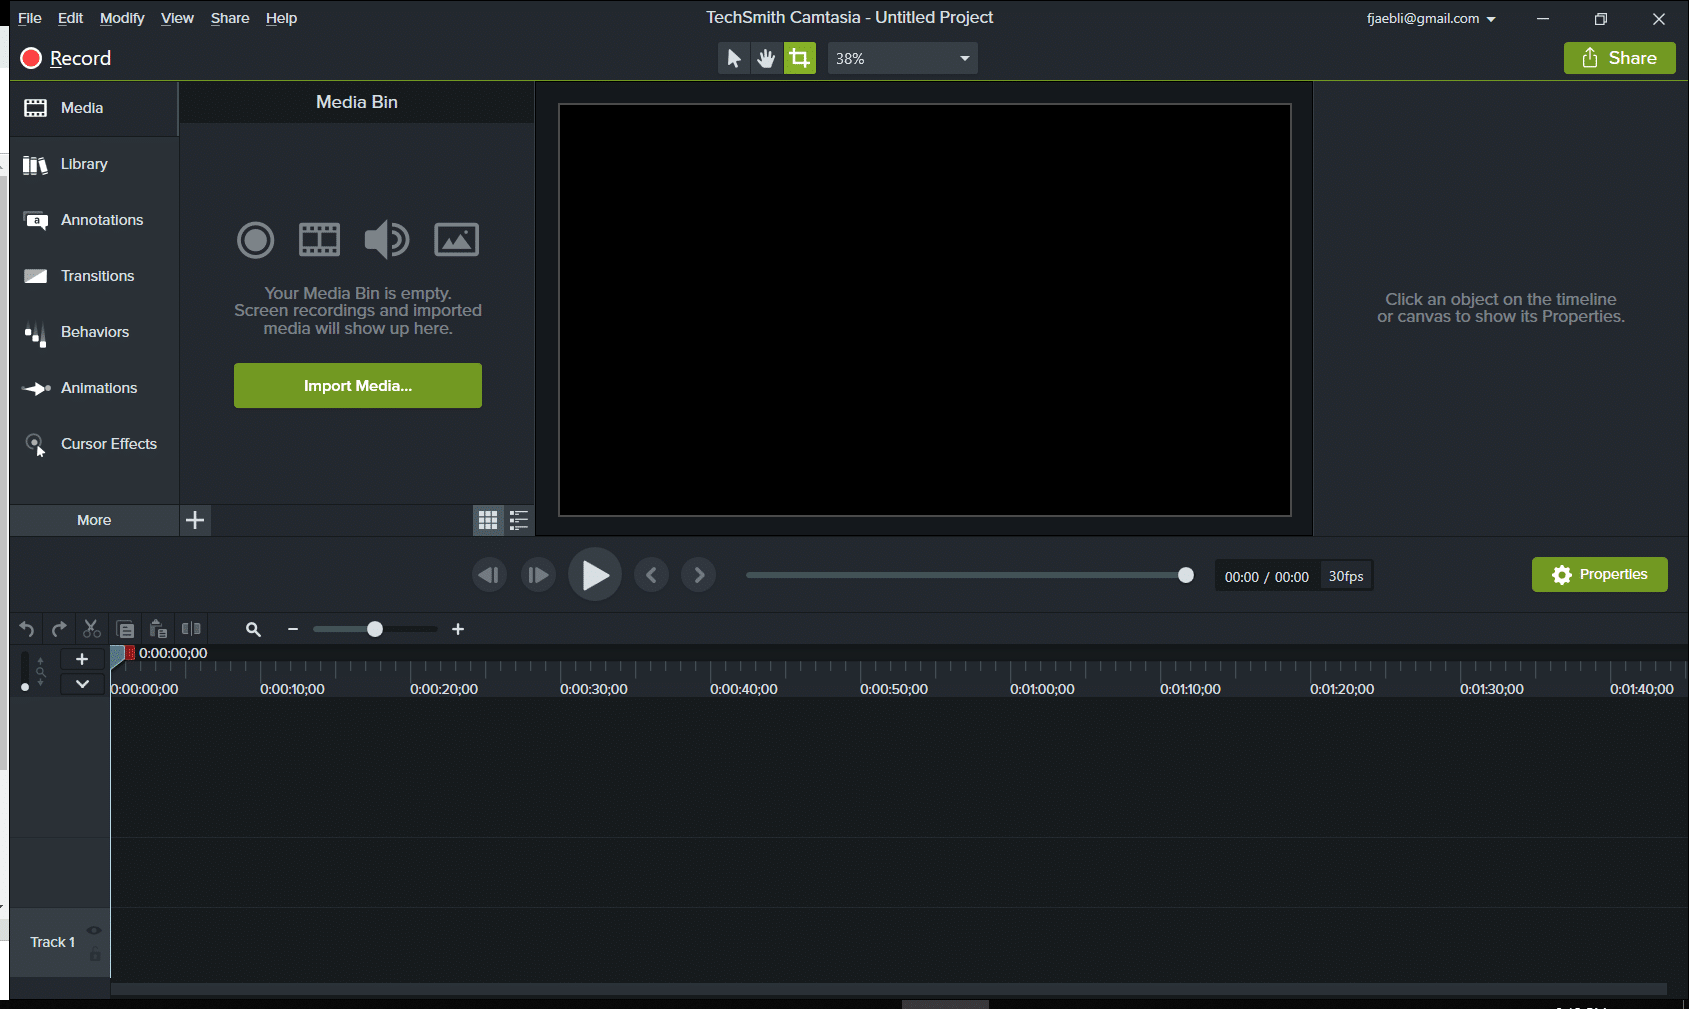 camtasia video assets